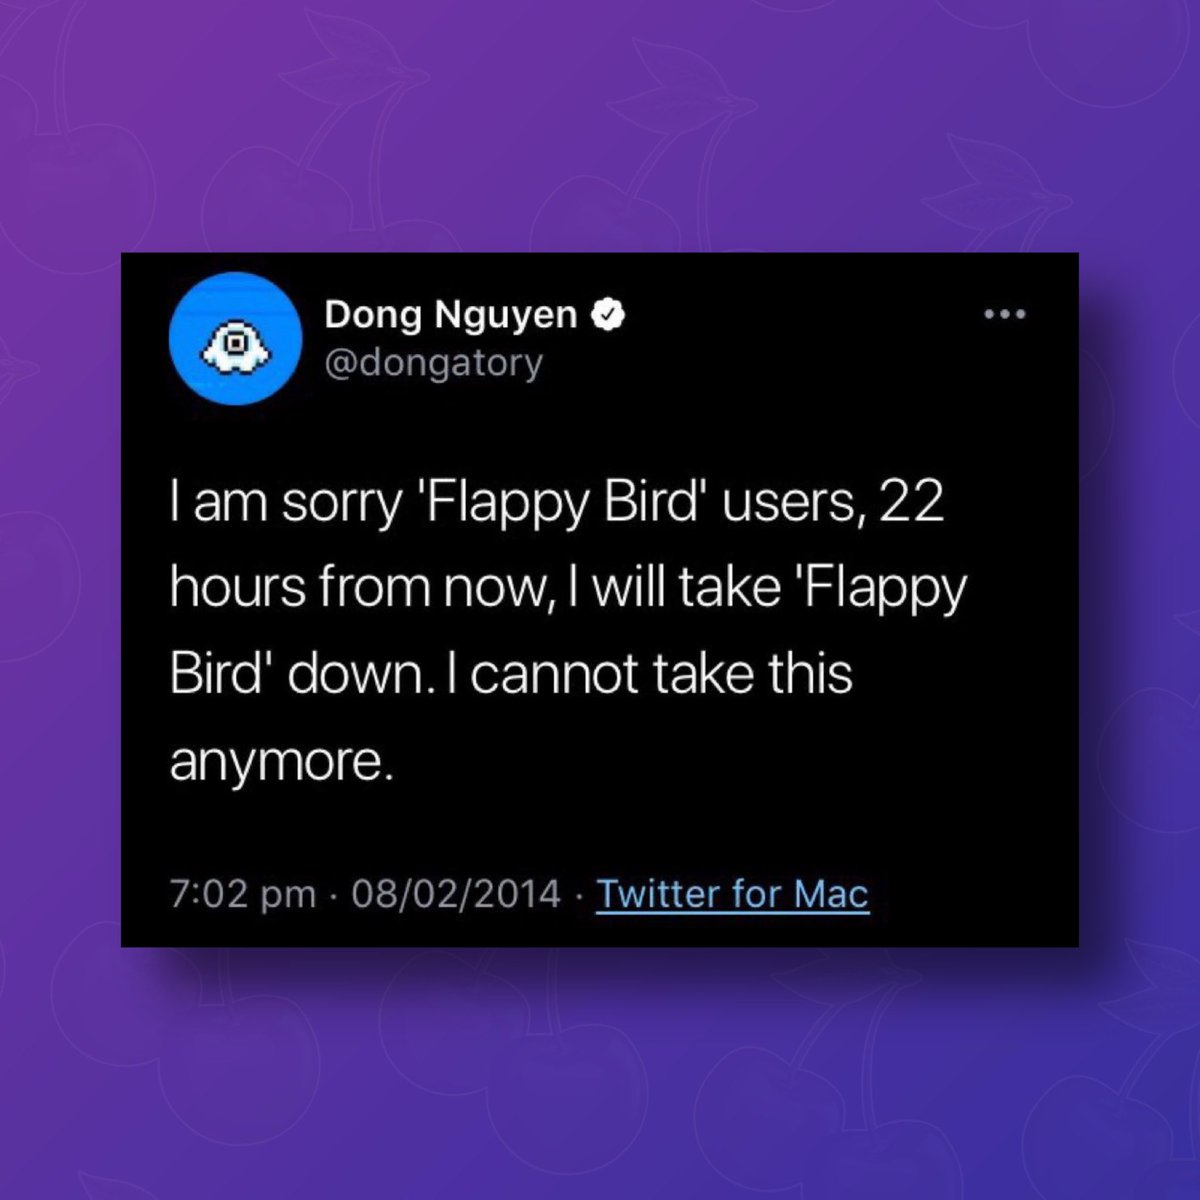 10 years ago, ‘Flappy Bird’ creator announced he was removing the game from the App Store, due to how addictive it had become.